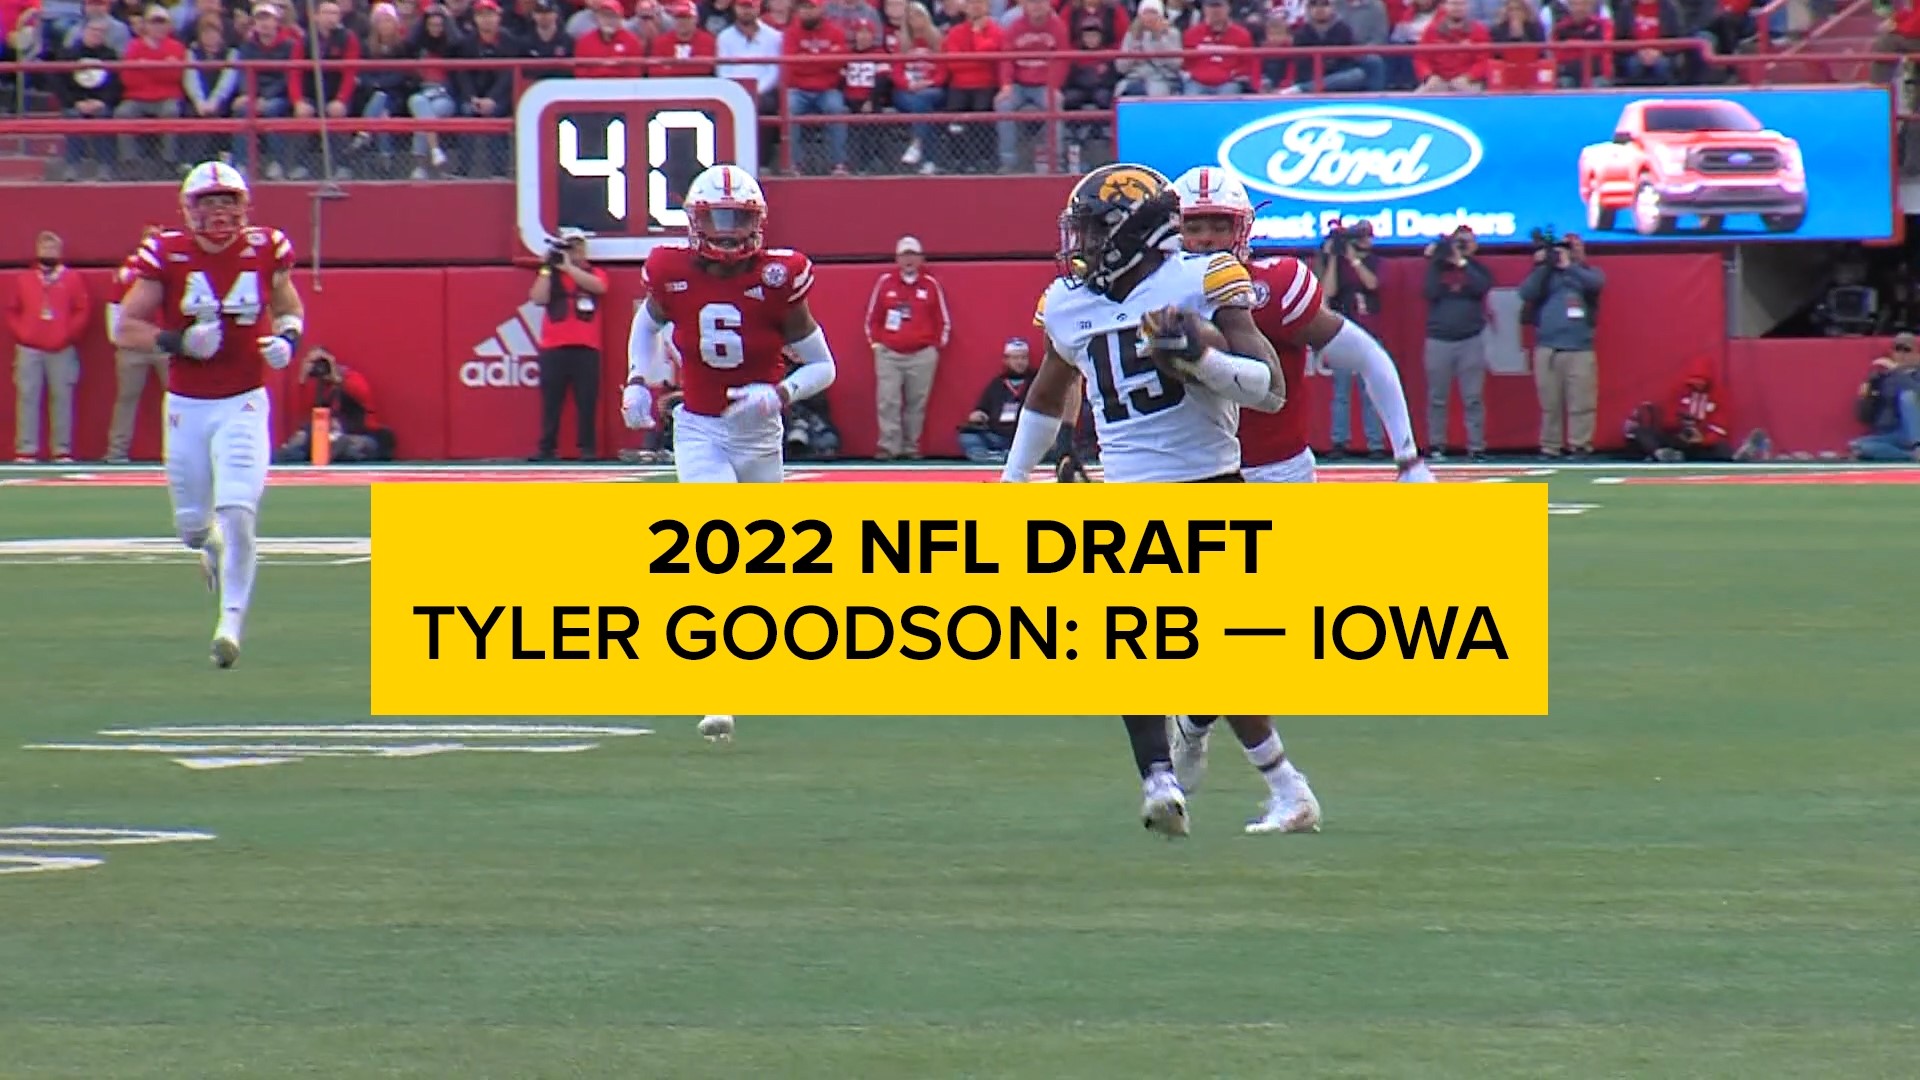 Over his three-year Hawkeye career, Tyler Goodson totaled 18 rushing touchdowns on nearly five yards per carry. He also had 70 career catches.